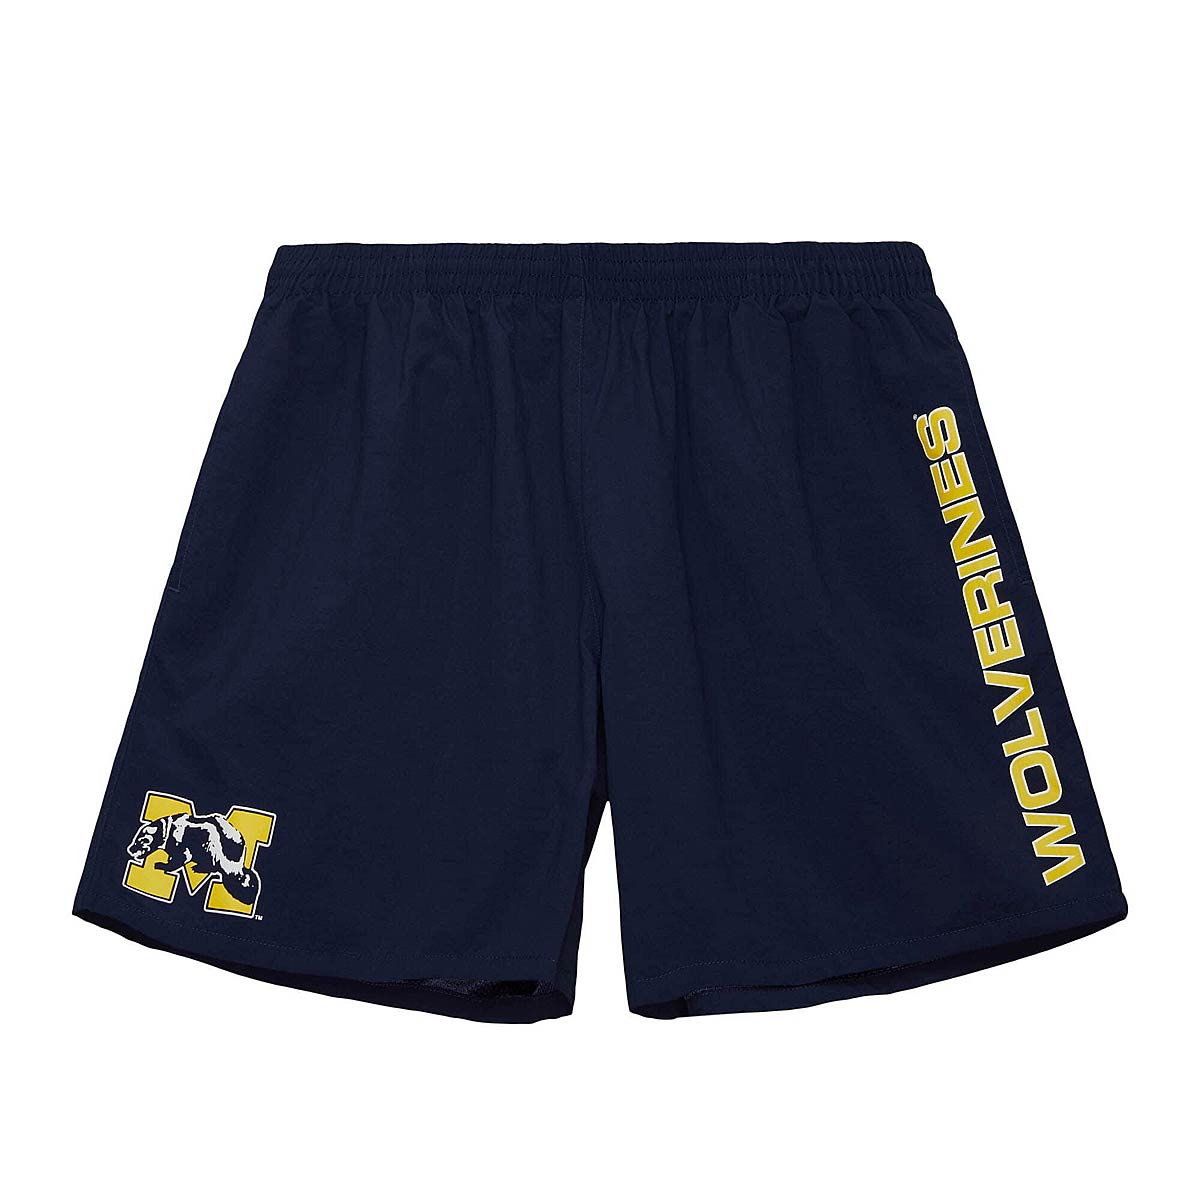 Image of Mitchell And Ness Ncaa Michigan Wolverines Team Heritage Woven Shorts, Navy